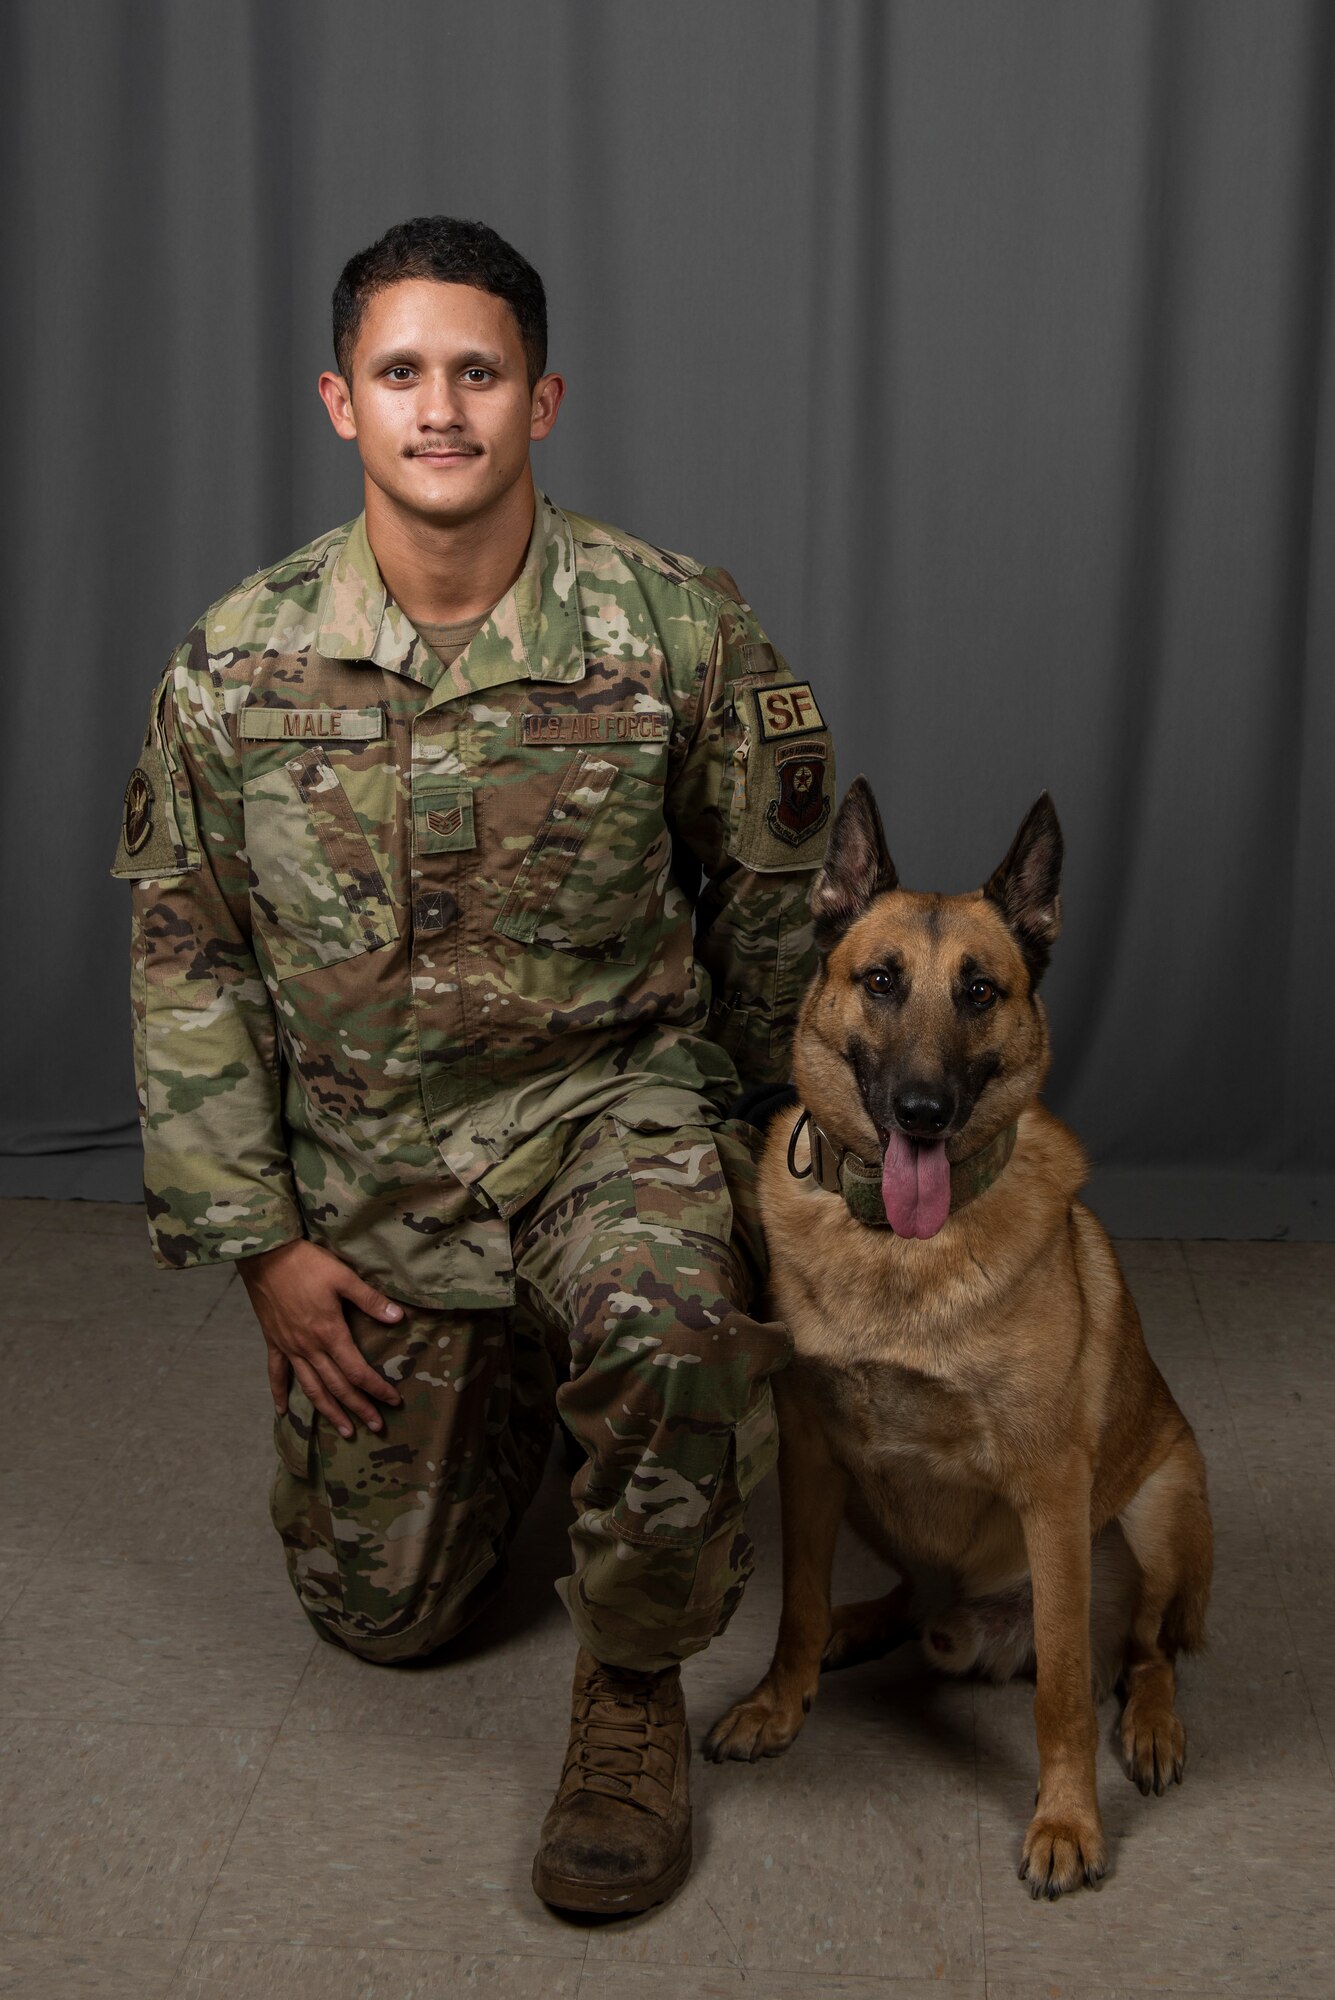 U.S. Air Force Staff Sgt. Brandon Male, a 1st Special Operations Security Forces Squadron Military Working Dog handler, poses for a photo with his dog, Ronny, a retired 1st SOSFS MWD, Aug. 23, 2022, at Hurlburt Field, Florida. Throughout his distinguished career, Ronny was a key part of 30 successful missions to include direct support to United States President Joe Biden, as well as former U.S. President Donald Trump, former U.S. Vice President Mike Pence and a number of Department of State officials, among others. Additionally, Ronny deployed to Eskan Village, Saudi Arabia.